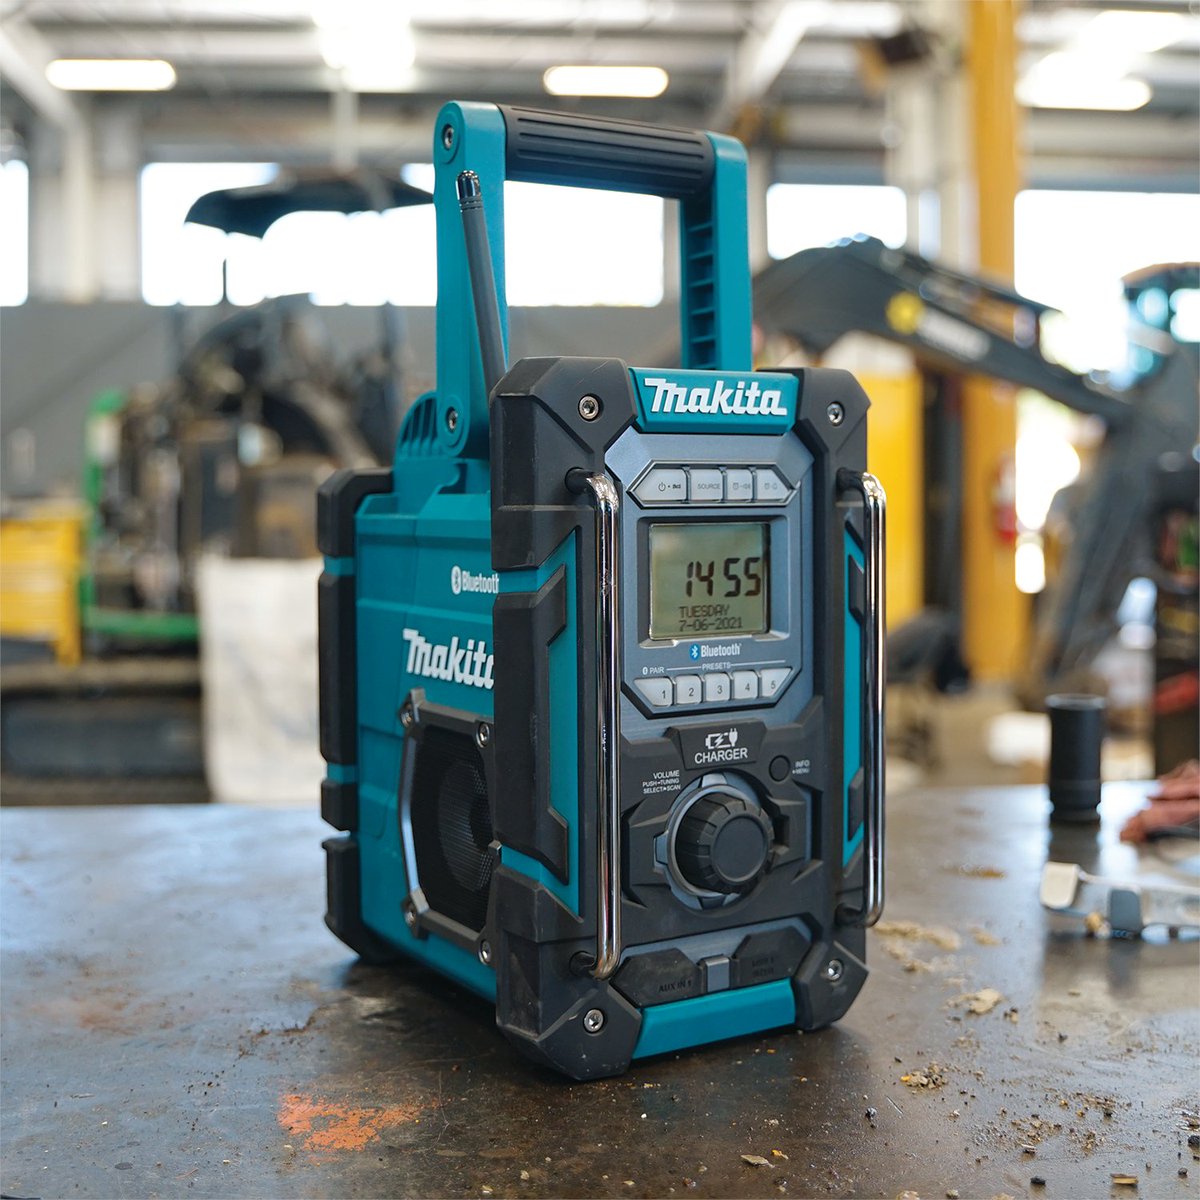 Listen to music on or off the job site with the Makita® 18V LXT® / 12V max CXT® Bluetooth Radio. The radio features 2 powerful 3.5” side-firing speakers. It features a digital tuner, Bluetooth, and MP3 player. #makitausa #makitatools #makitalxt